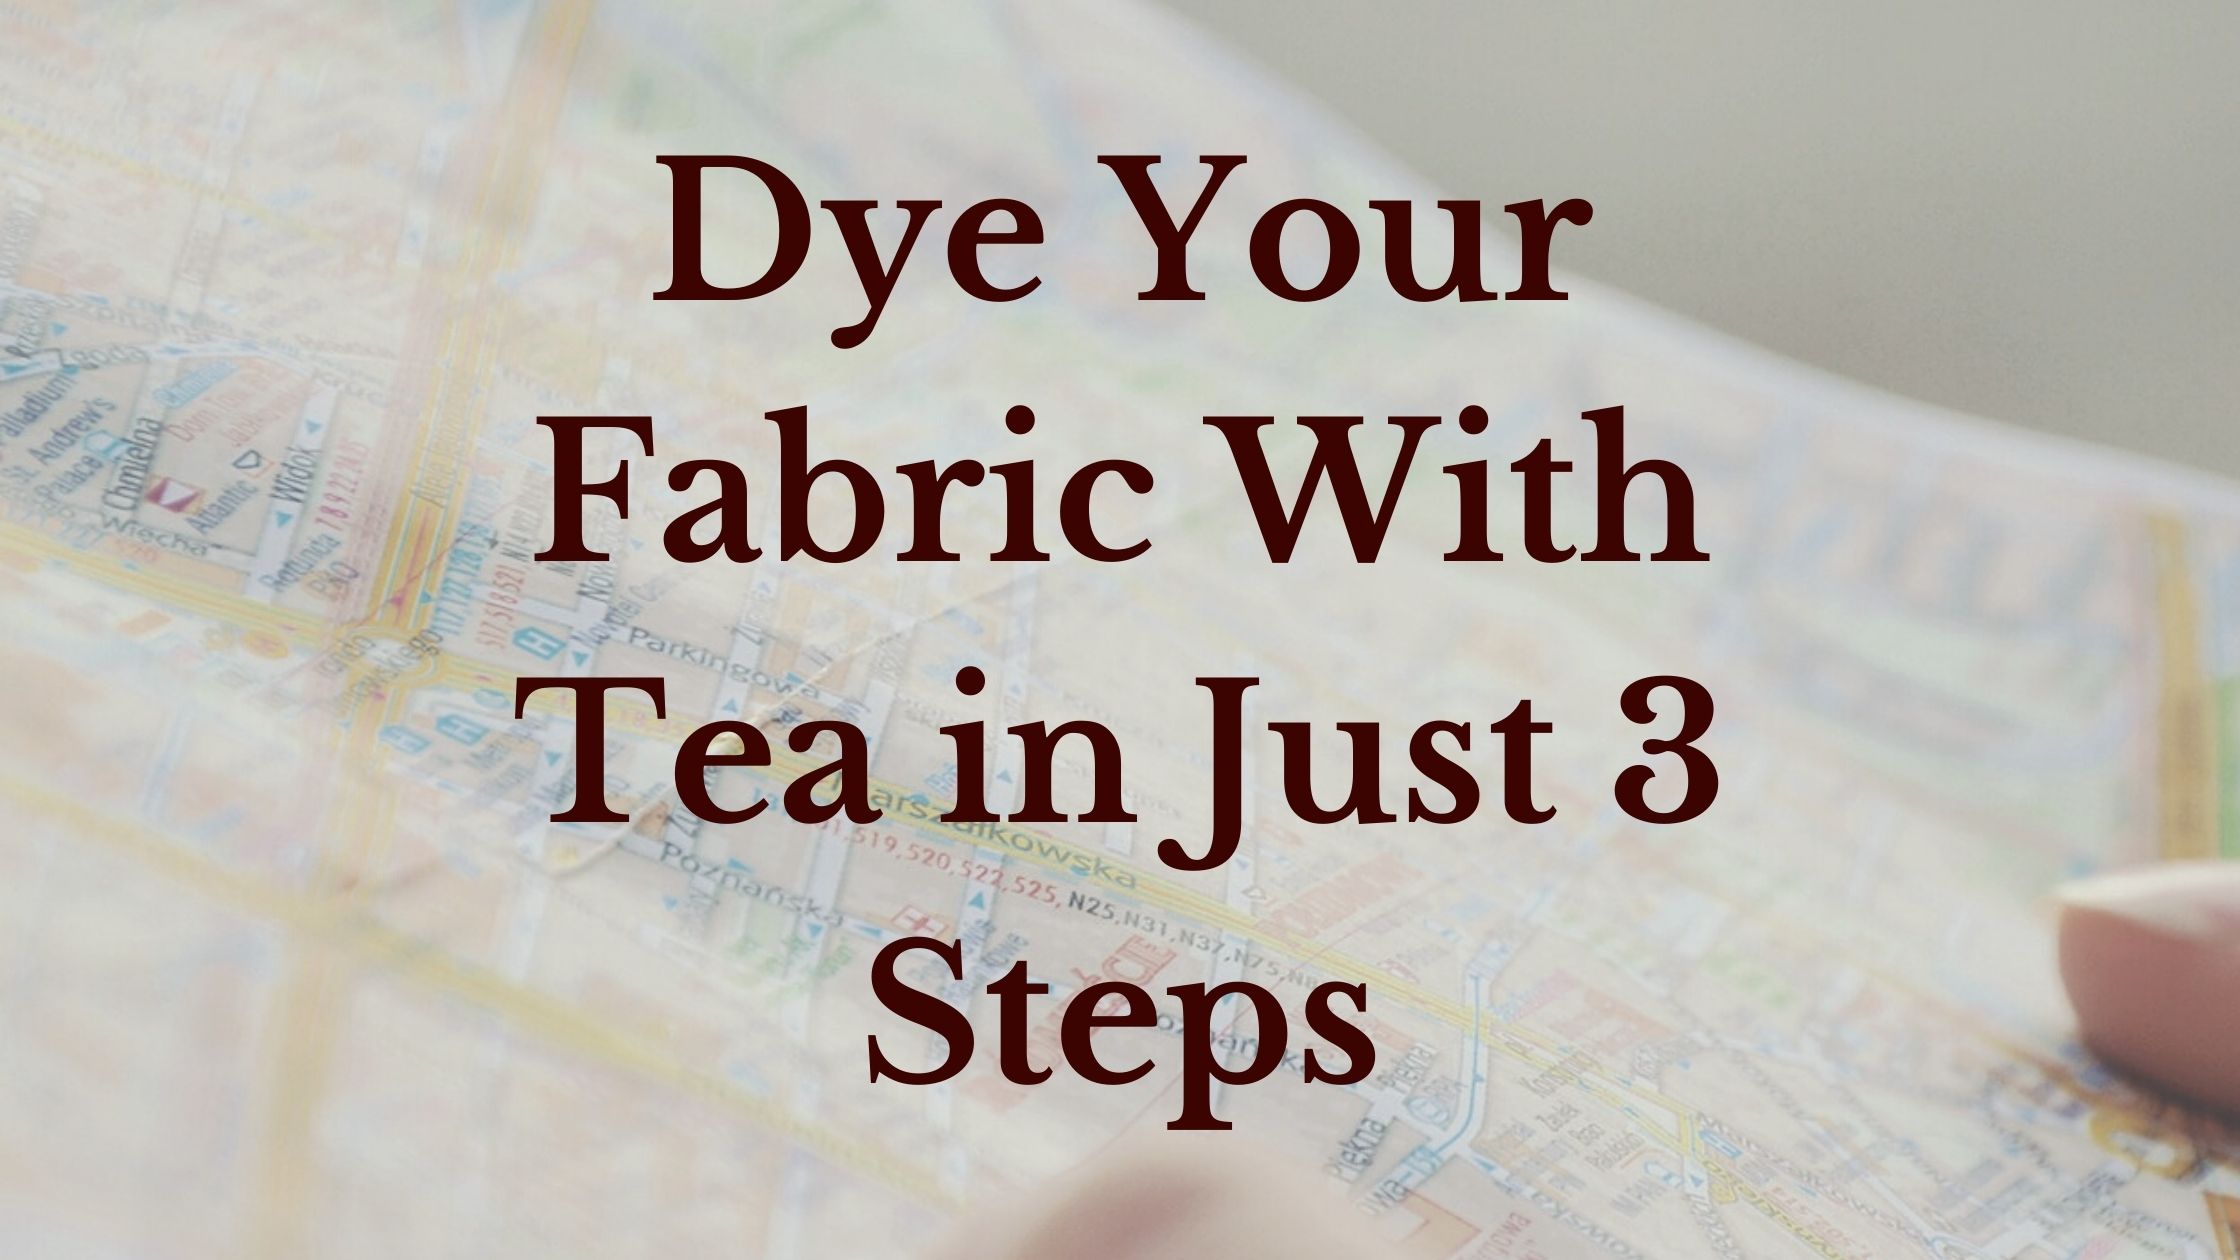 Dye Your Fabric With Tea in Just 3 Steps